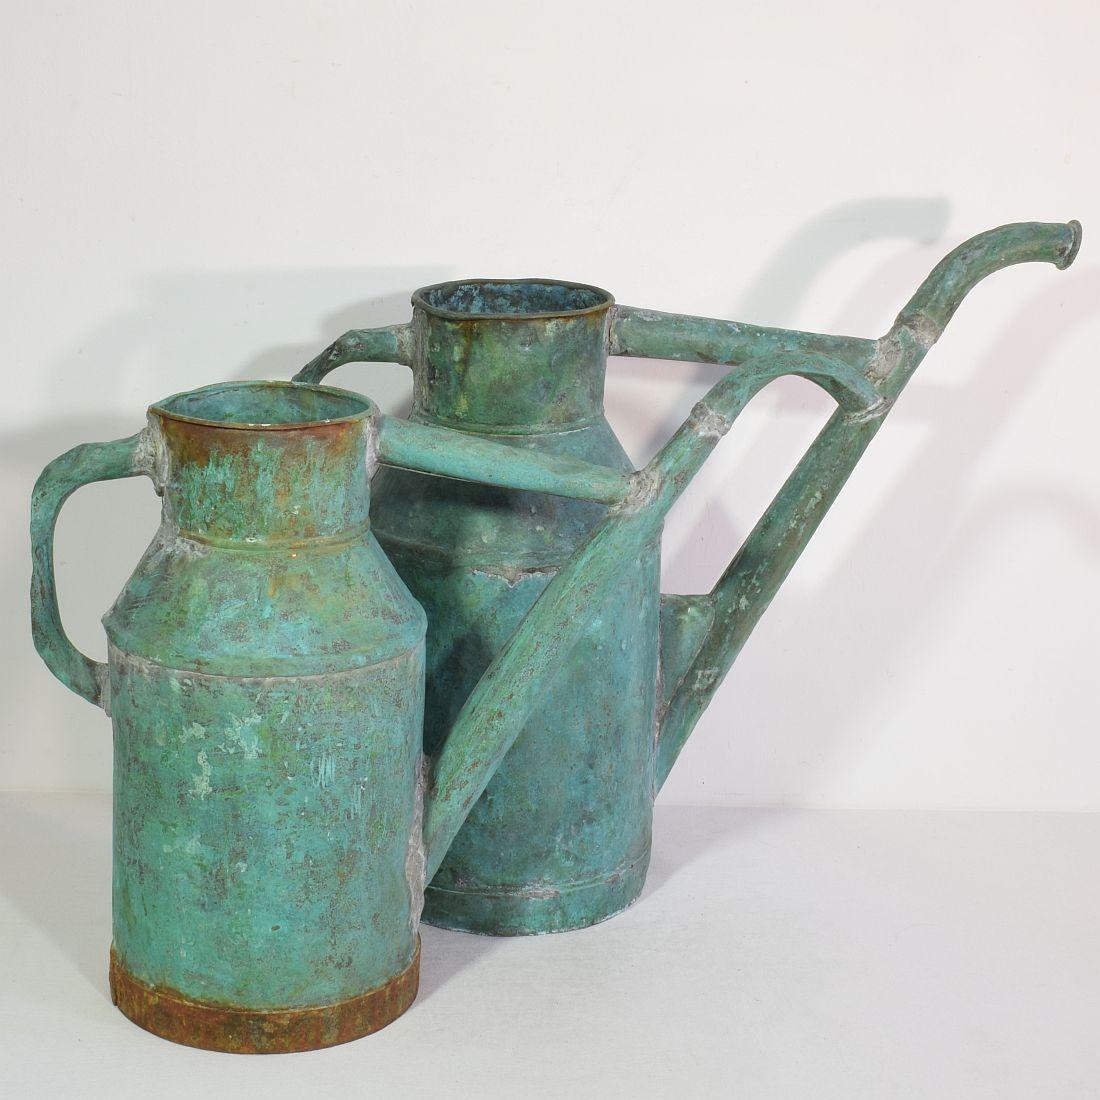 Stunning copper water cans with great patina. France, circa 1850-1900. Weathered, losses and old repairs.
Great to use as decorative objects in or outside. Might have leaks.